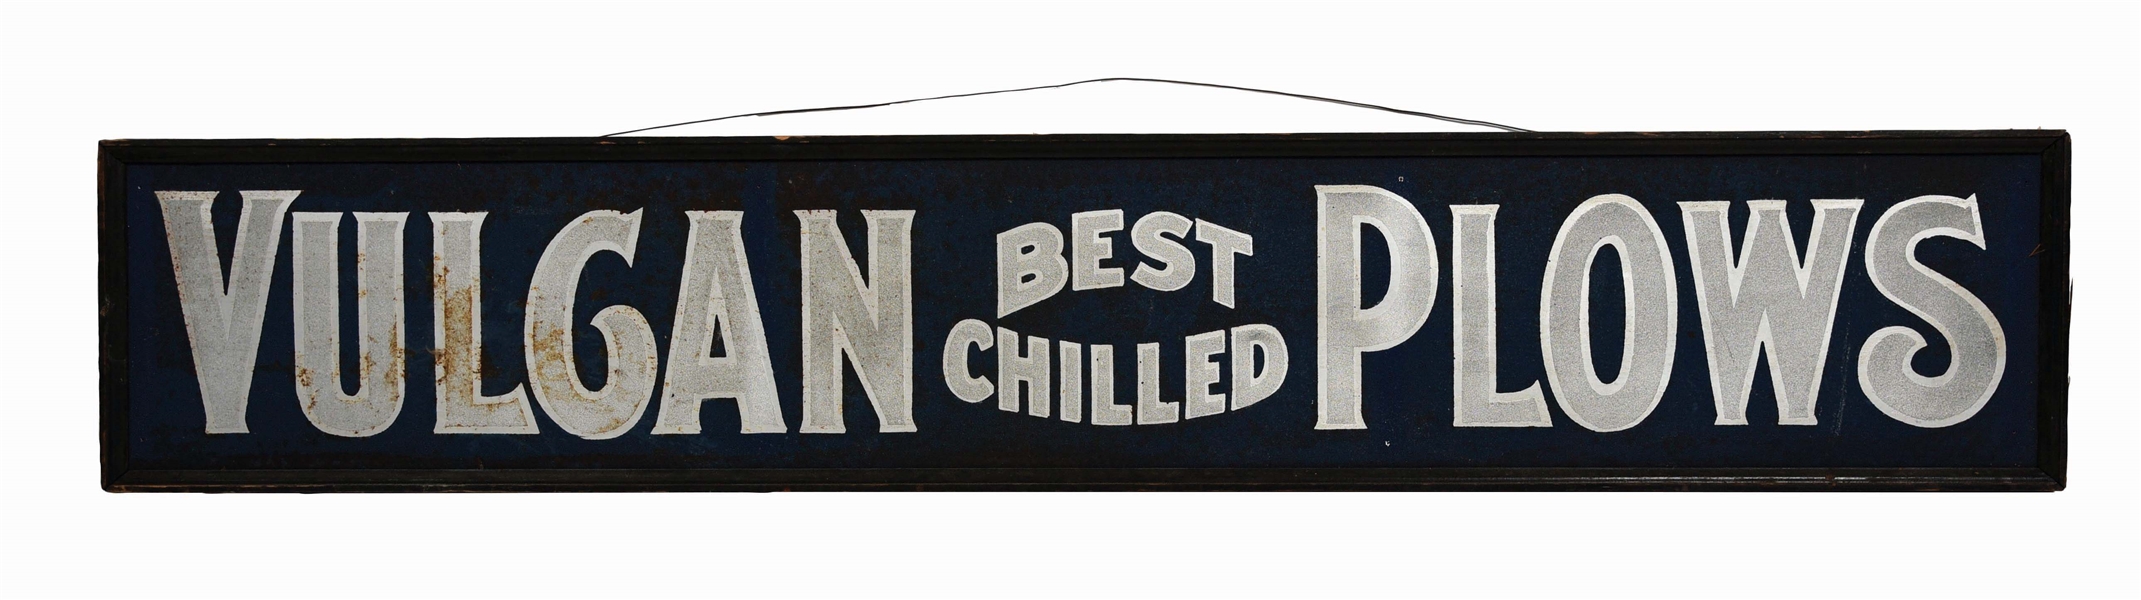 VULCAN BEST CHILLED PLOWS SMALTS PAINTED TIN SIGN W/ ORIGINAL WOOD FRAME. 